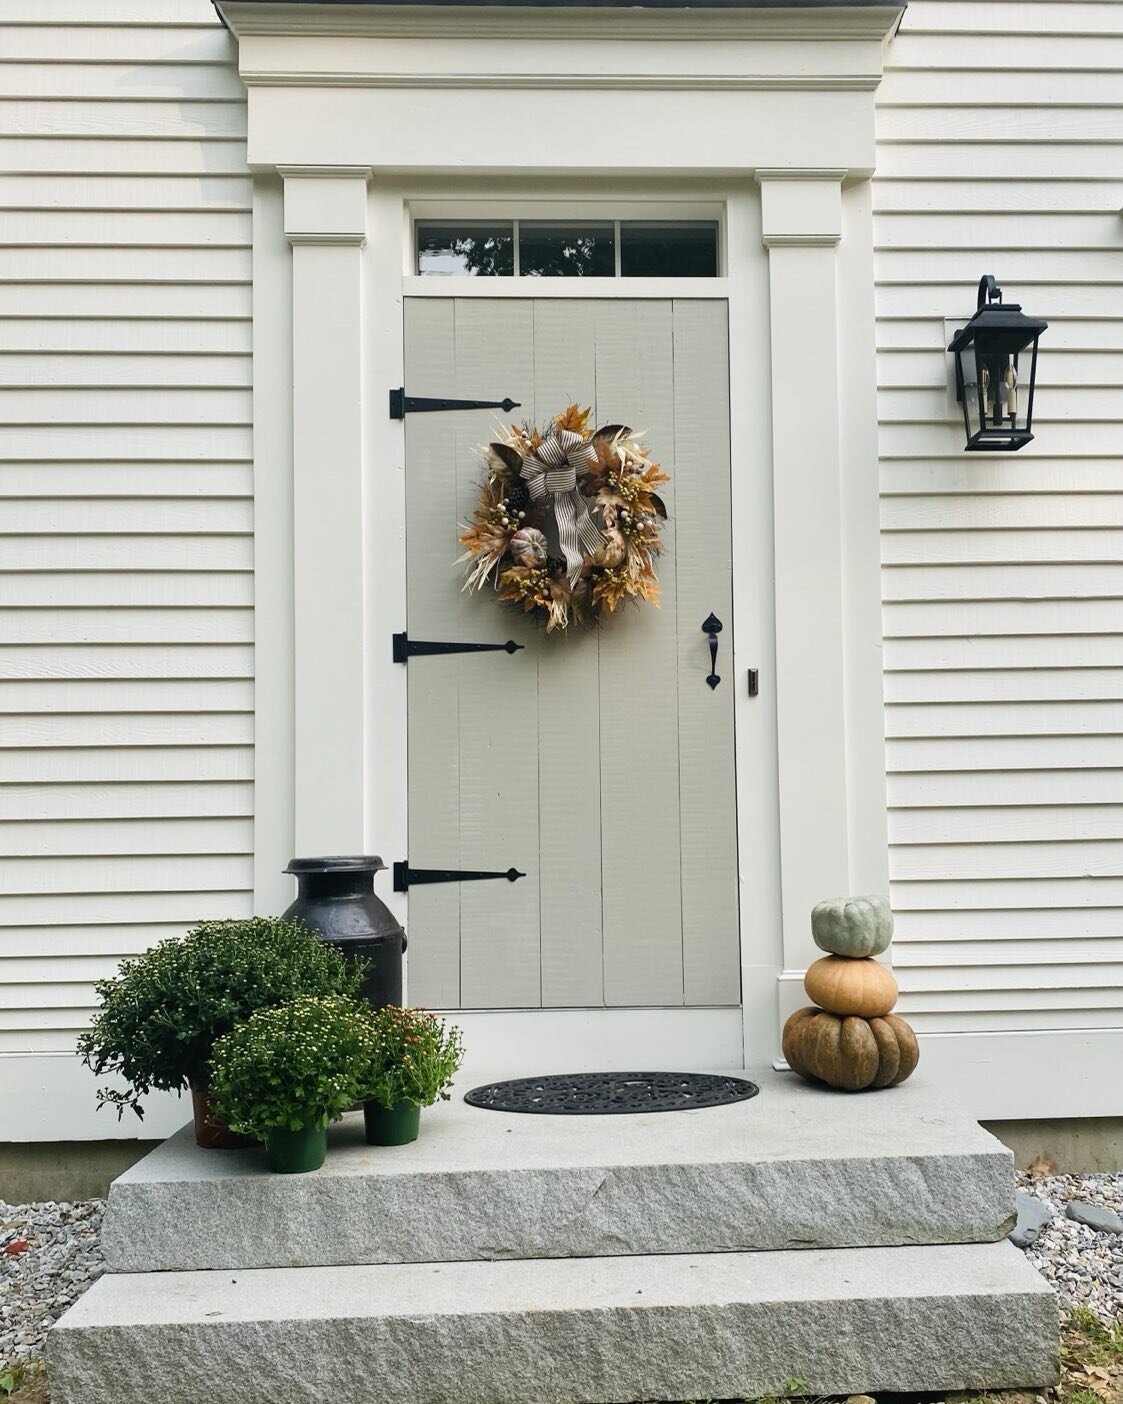 Happy September 1st. I can&rsquo;t wait to recreate this look for our front door again this year.  #interiordesigner  #falldecor #mums #colonial #colonialhouse #newenglandstyle #newhampshire #Fall #seasons #newengland #frontdoor #princesspumpkins #pu